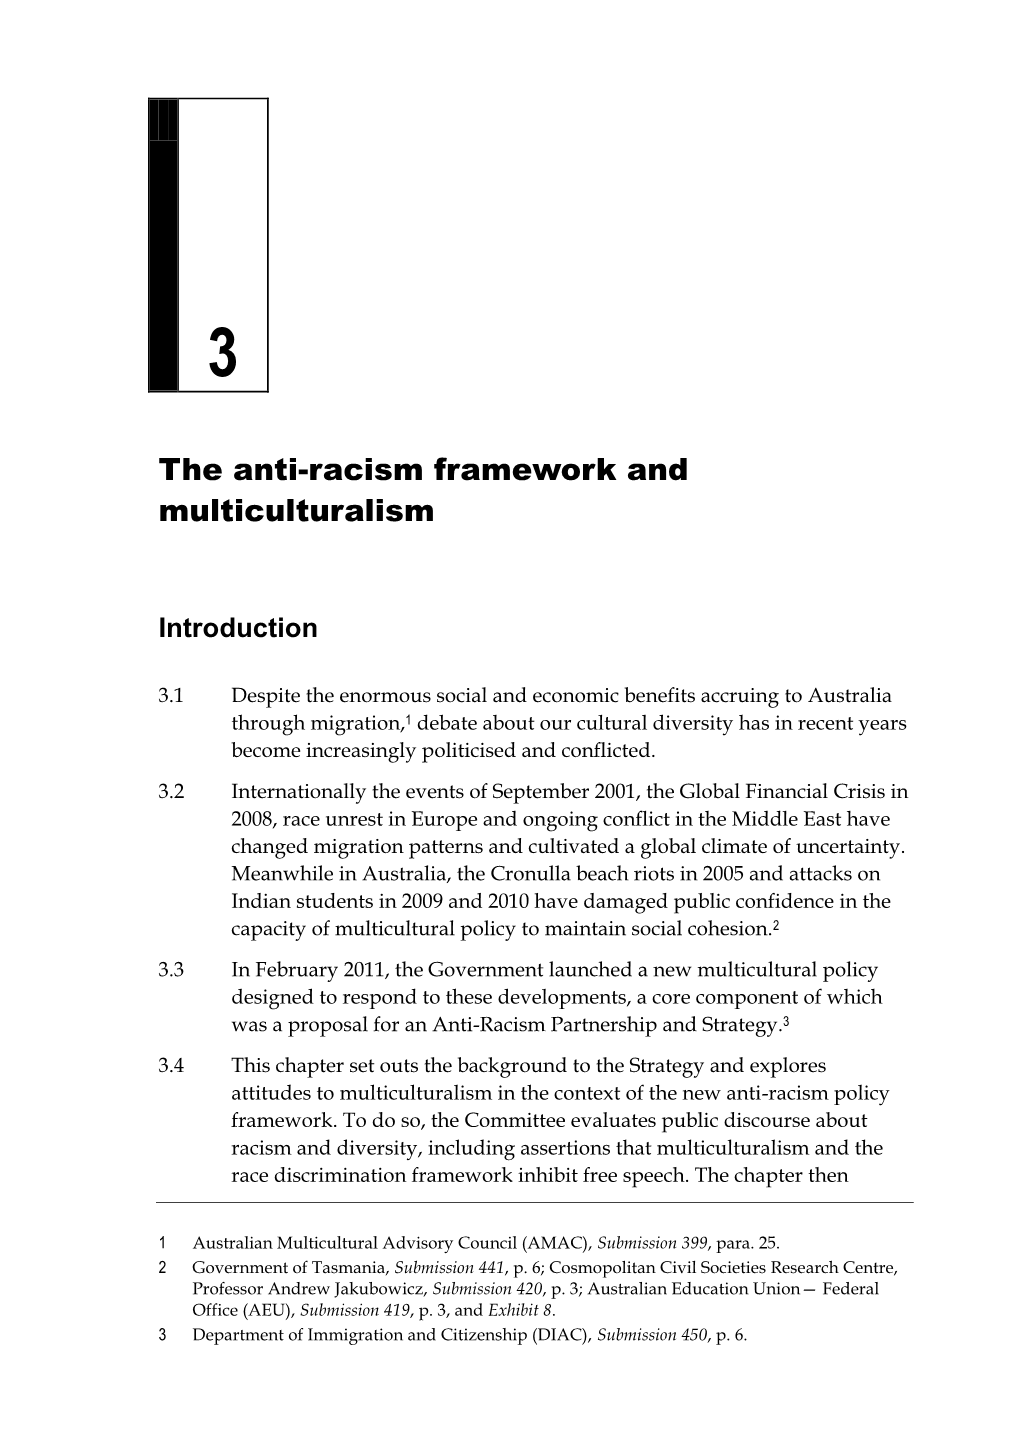 Chapter 3: the Anti-Racism Framework and Multiculturalism